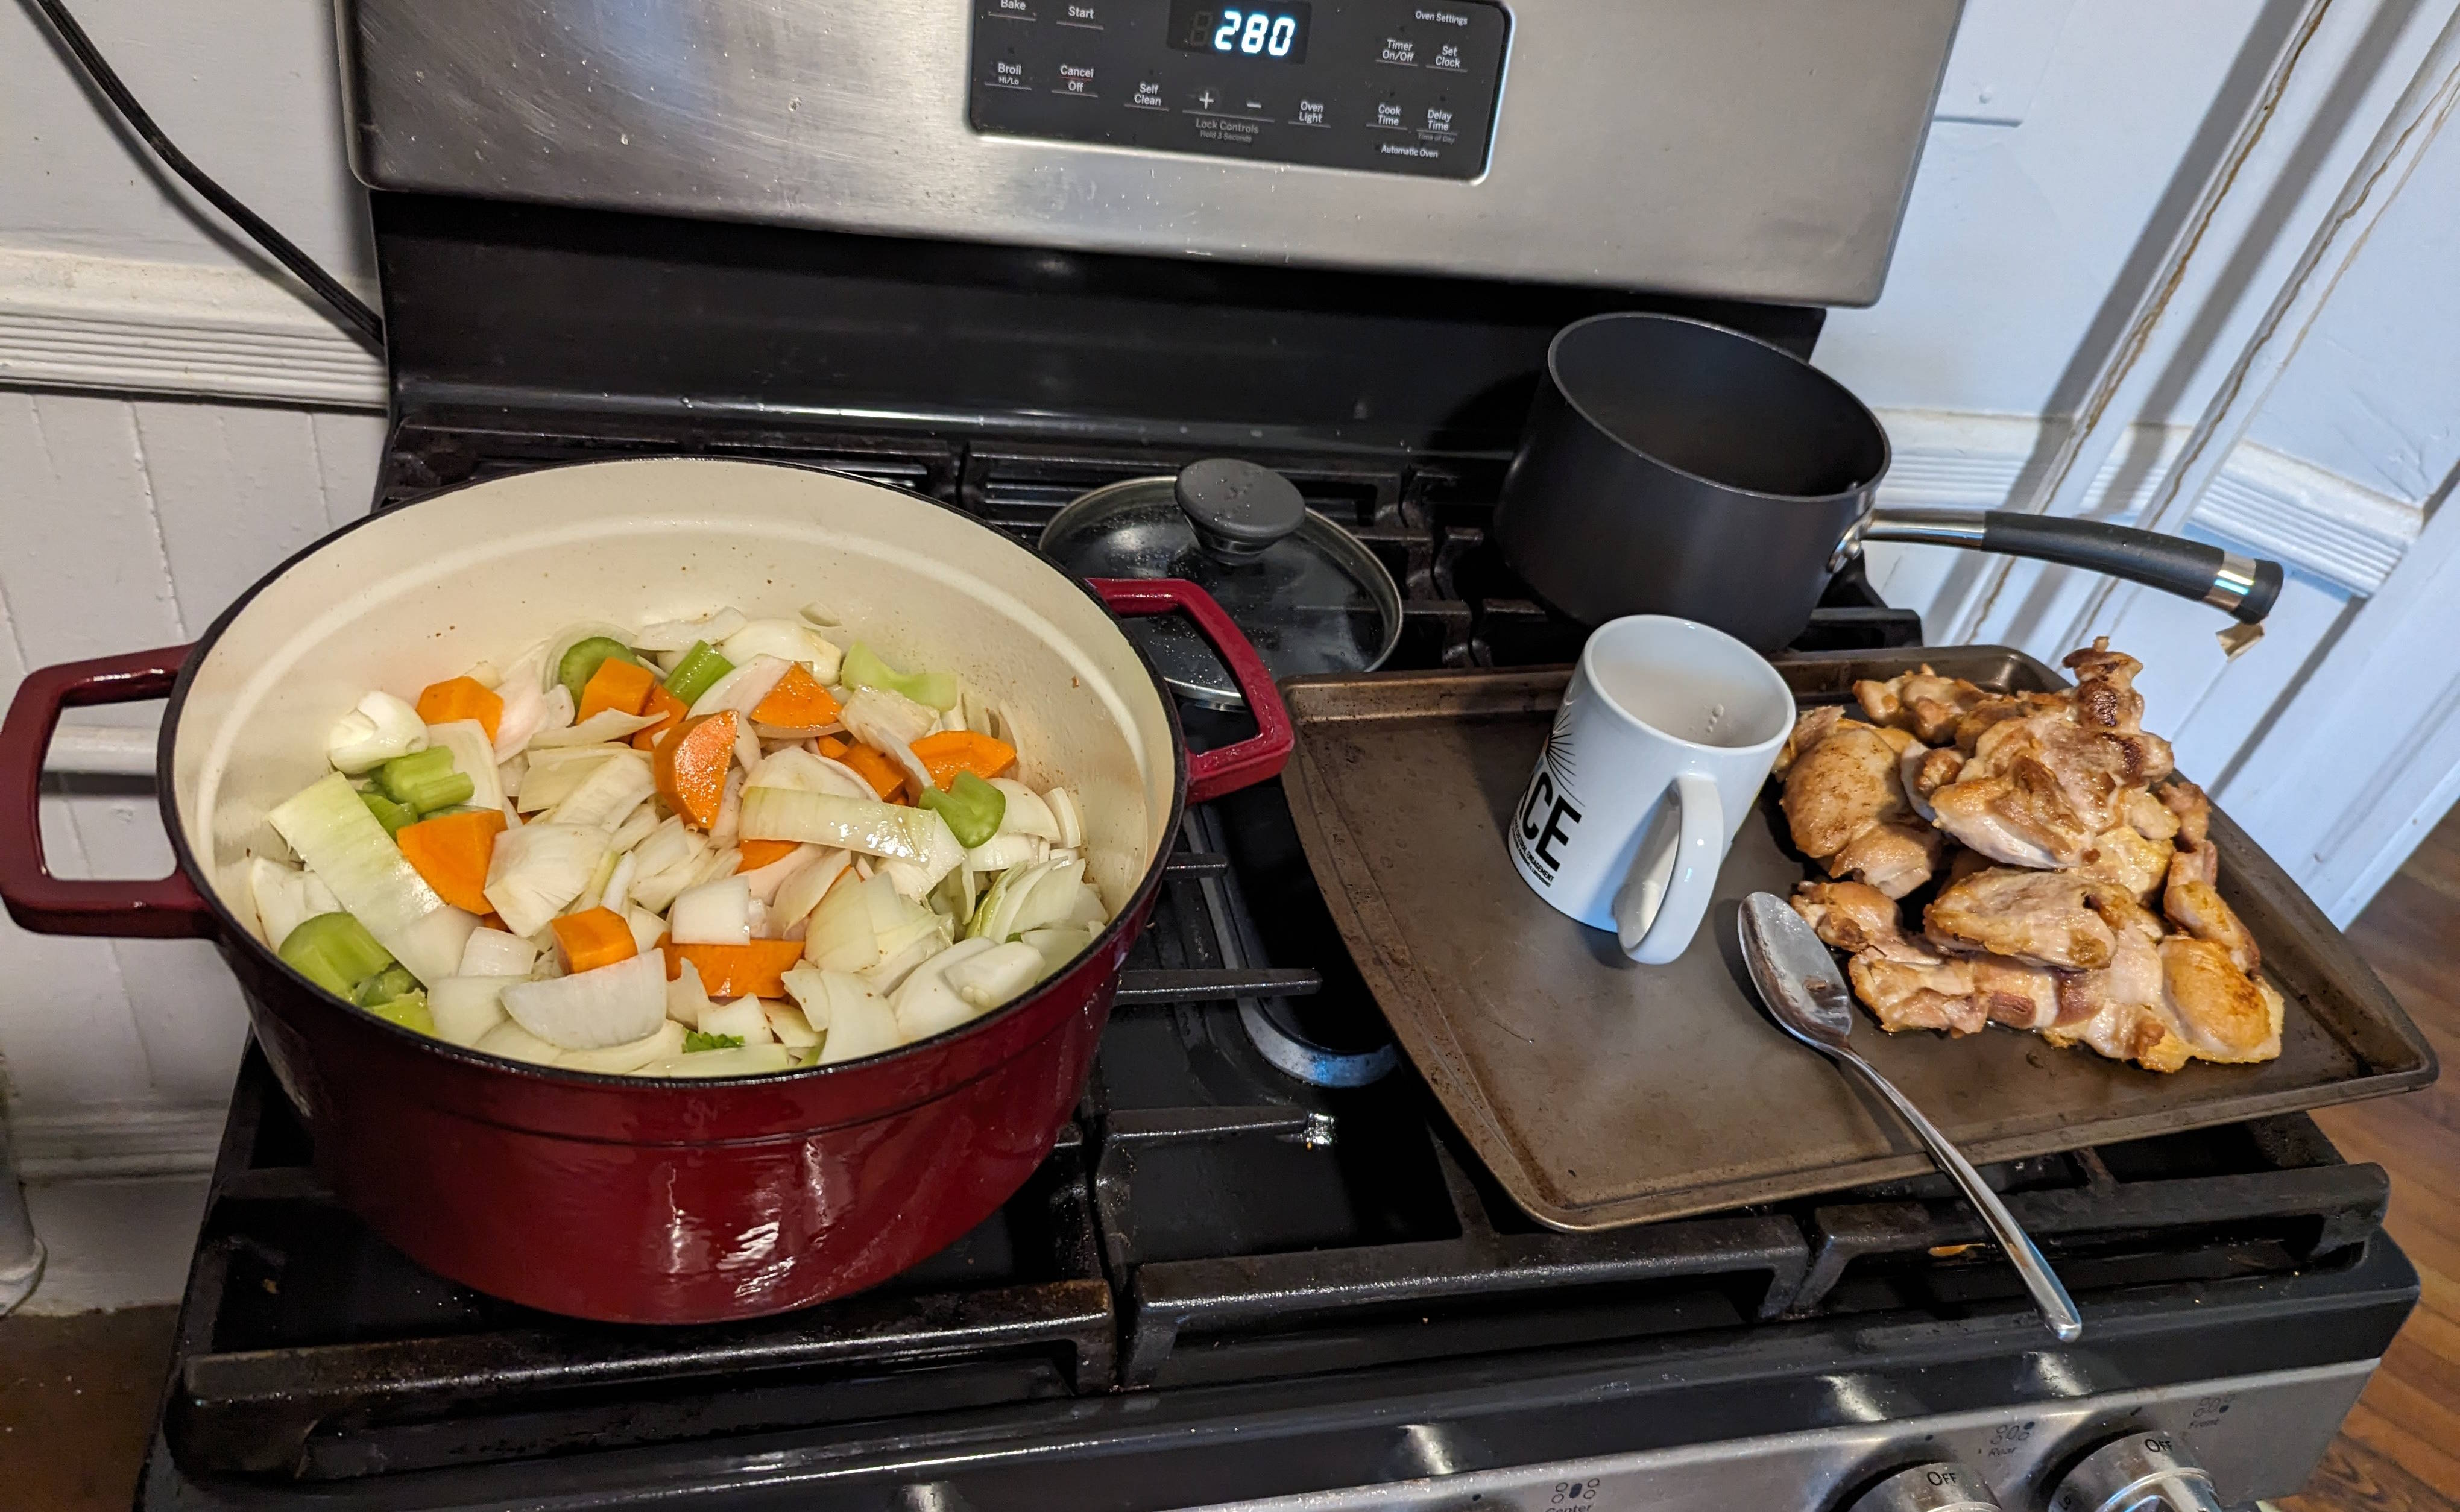 Dutch oven full of chopped onion, celery, carrot on the left, and a baking sheet with about two pounds of seared chicken on the right.